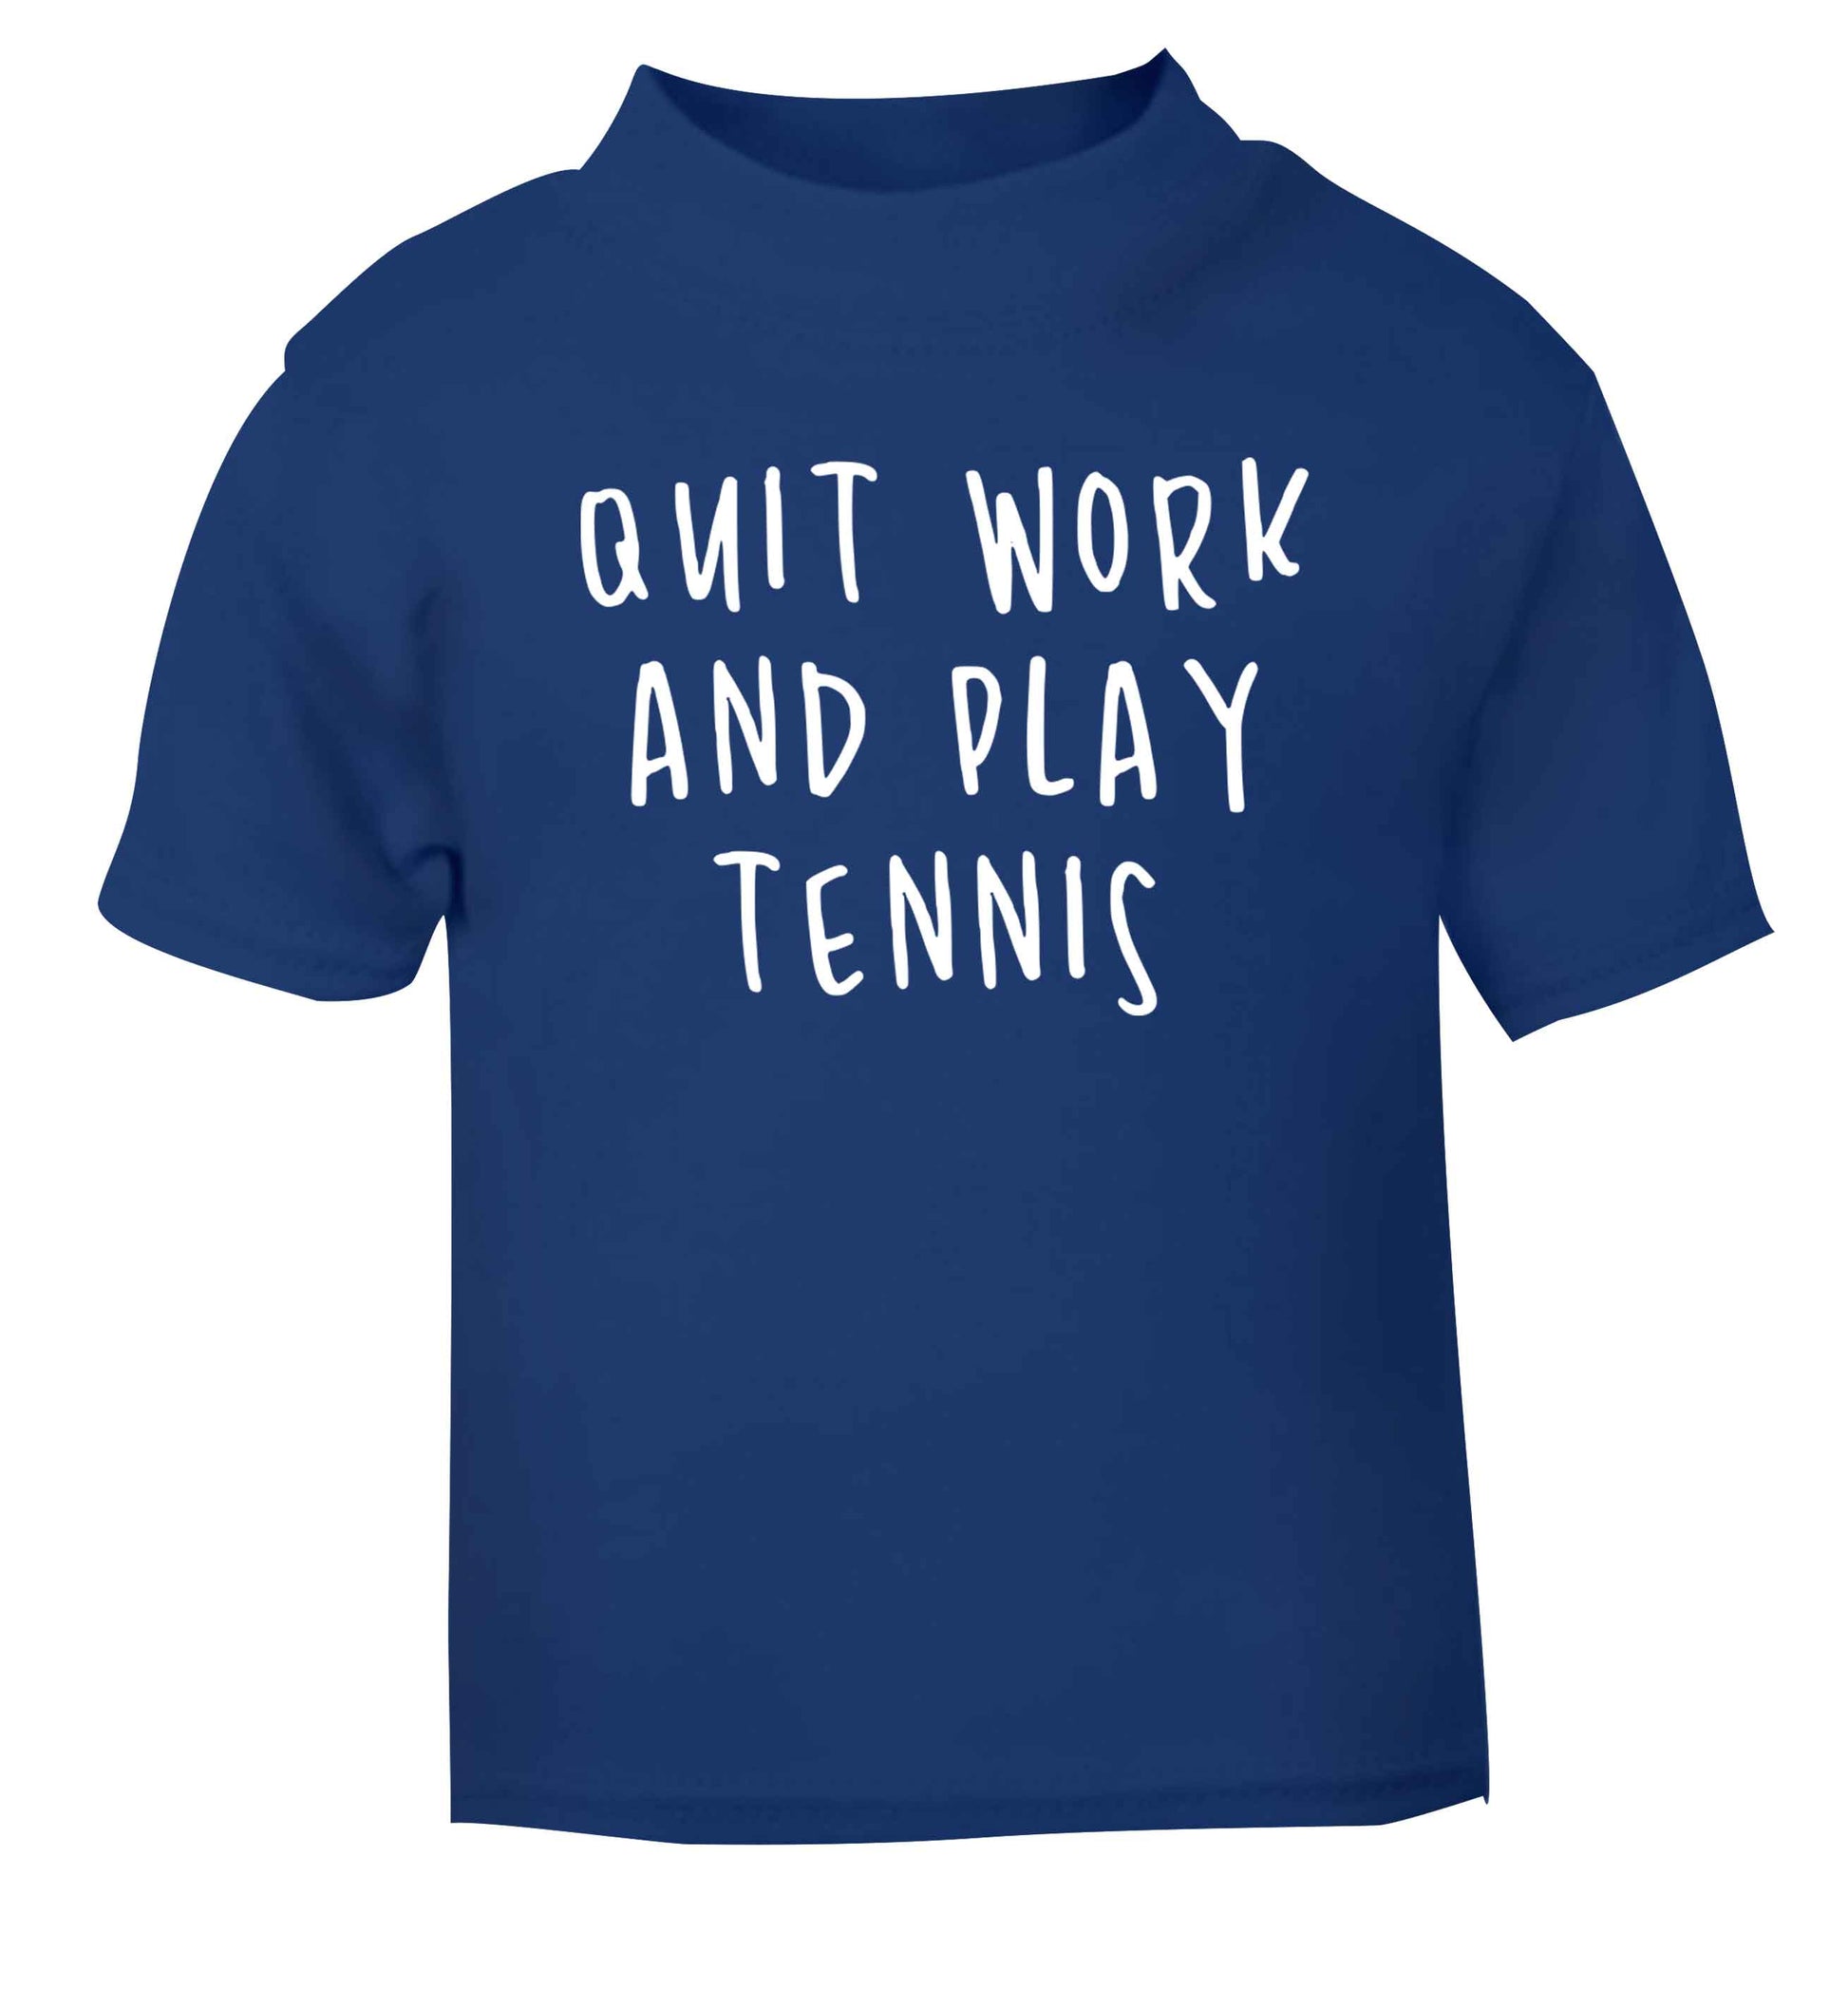 Quit work and play tennis blue Baby Toddler Tshirt 2 Years